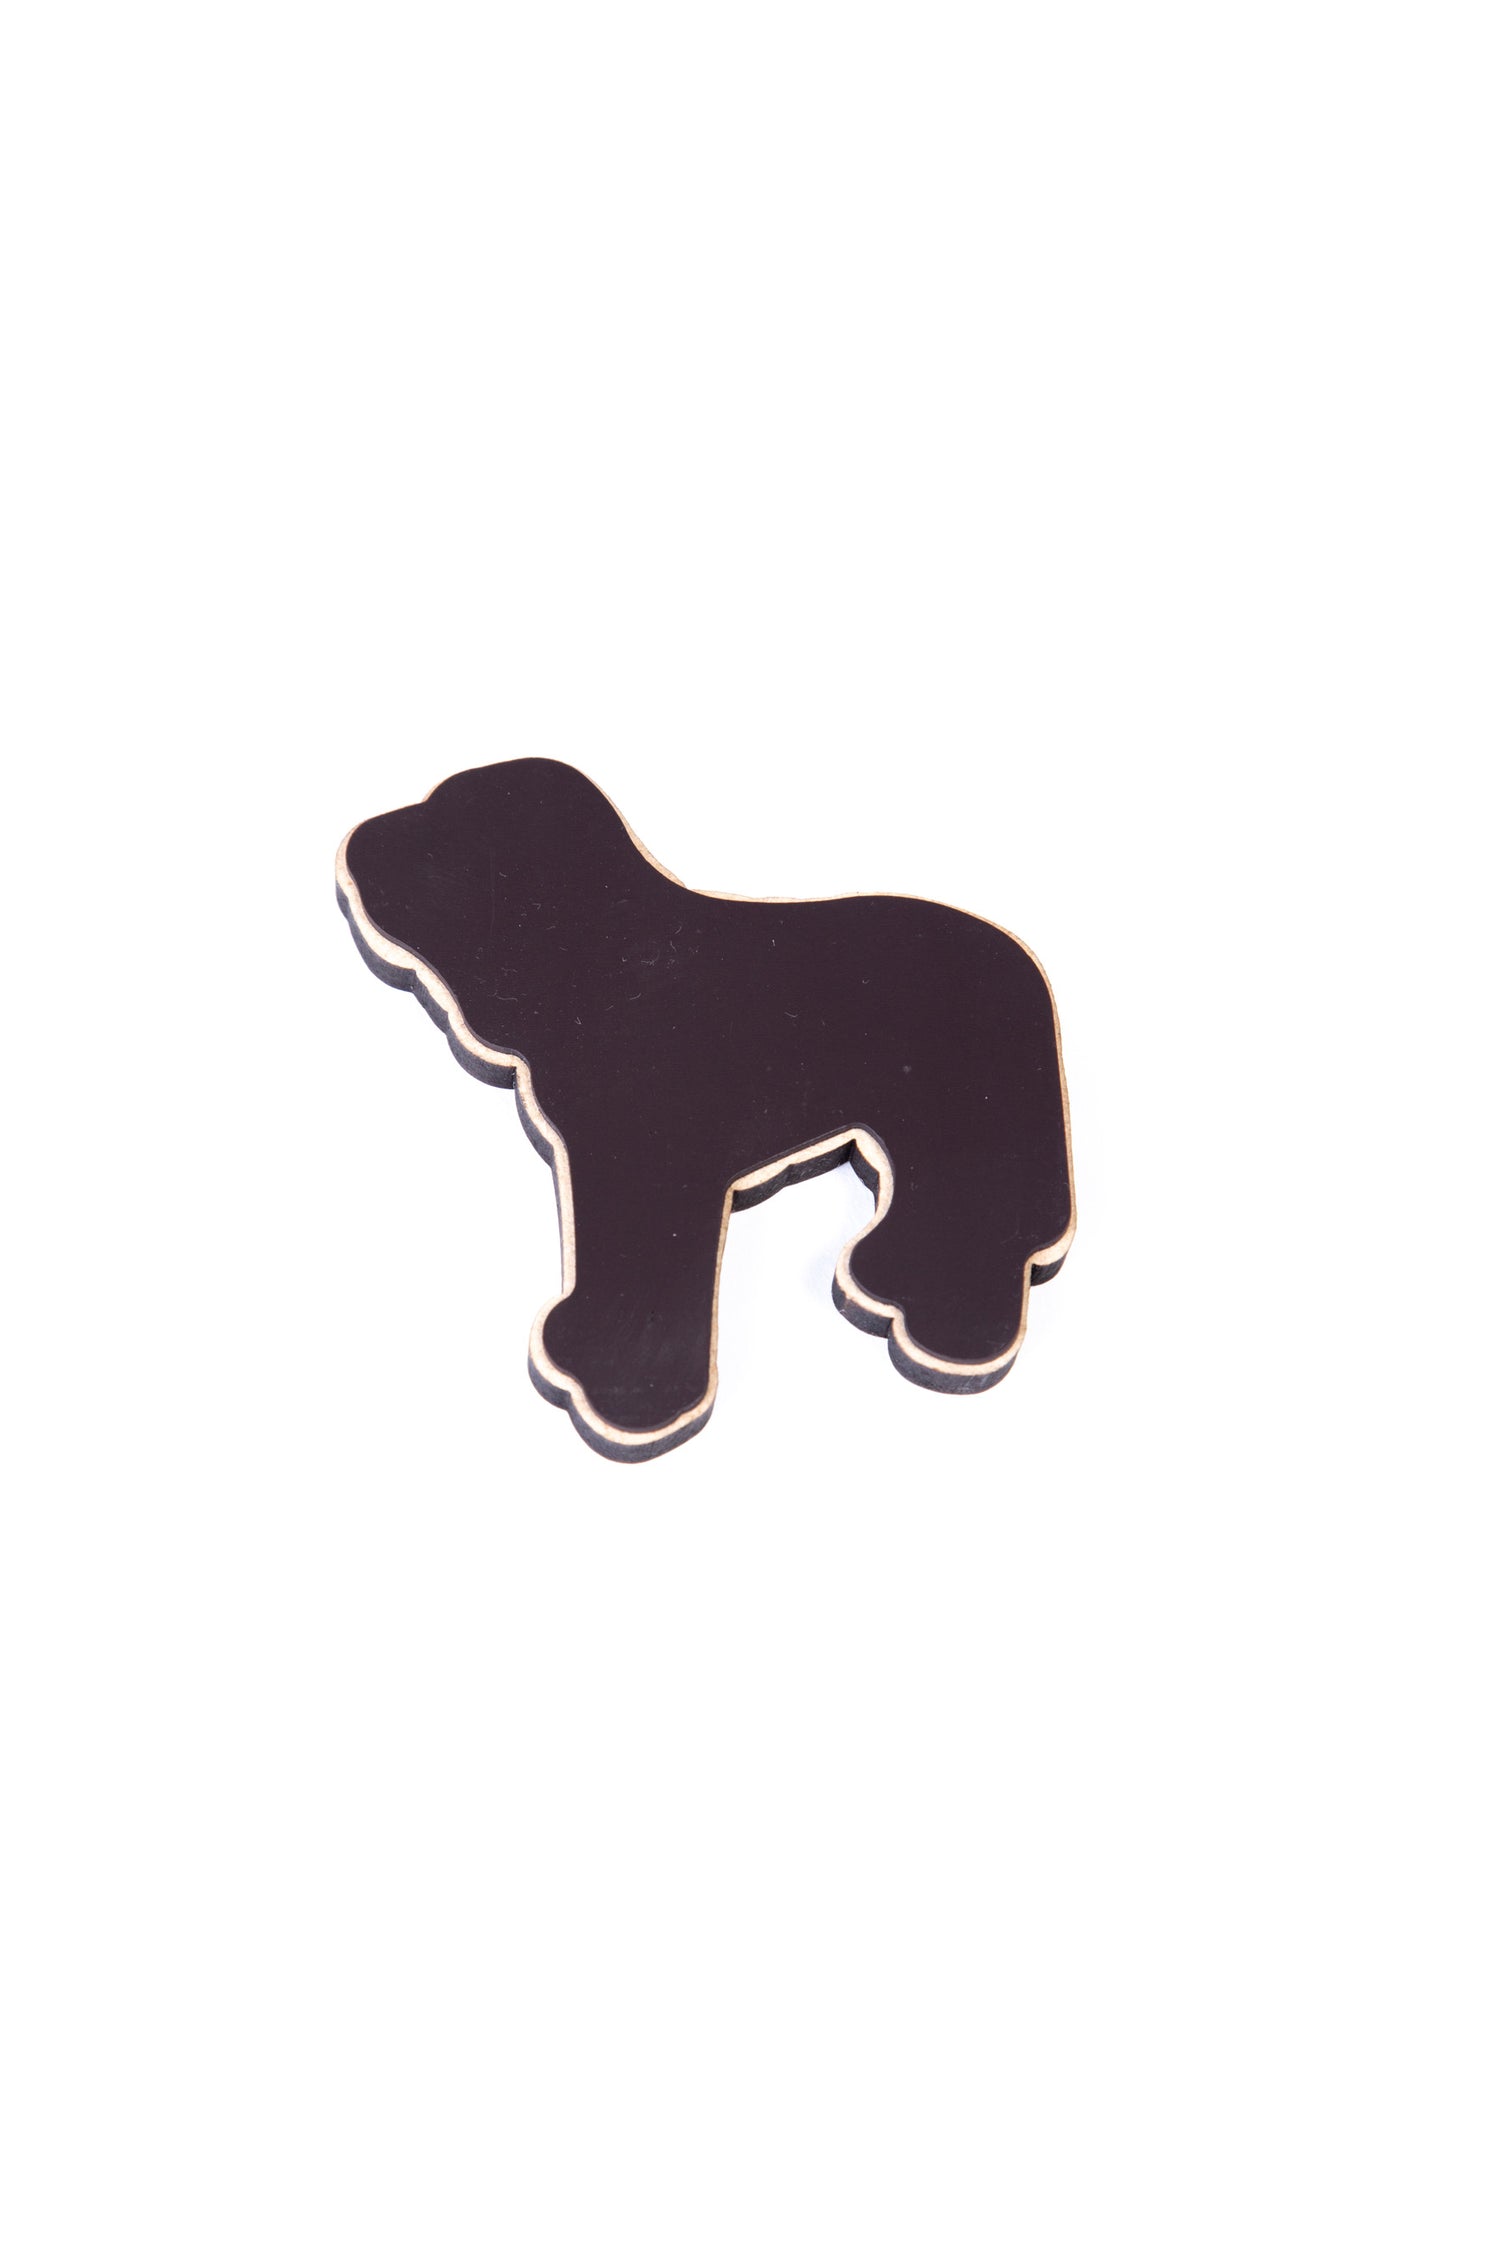 Ole Red Orlando Dog Silhouette Magnet